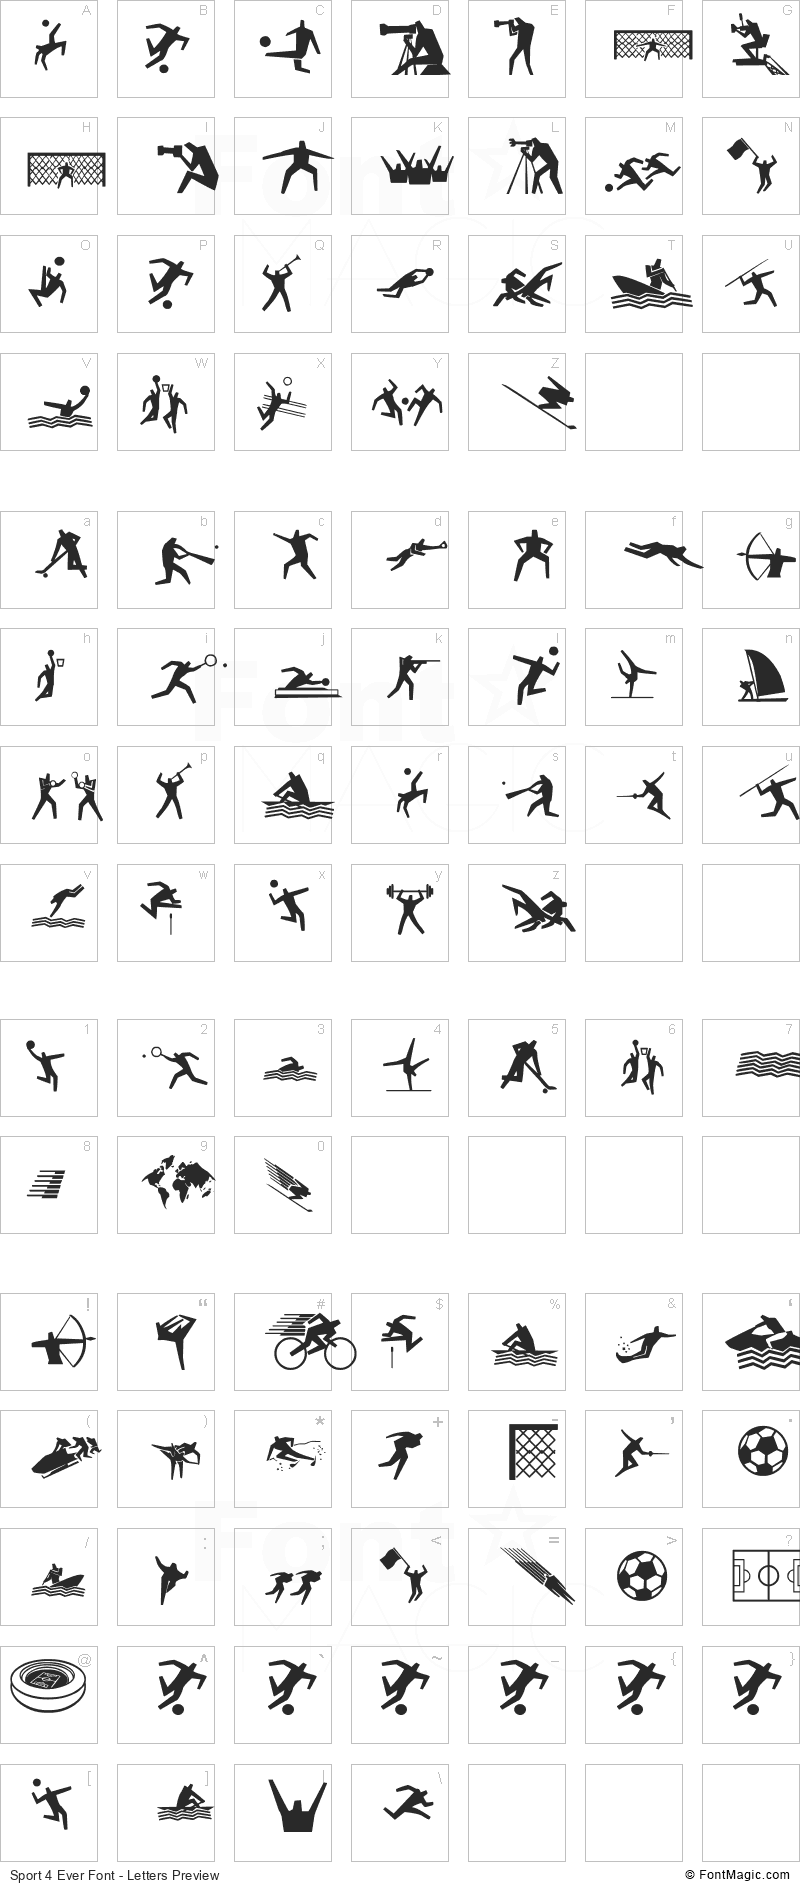 Sport 4 Ever Font - All Latters Preview Chart